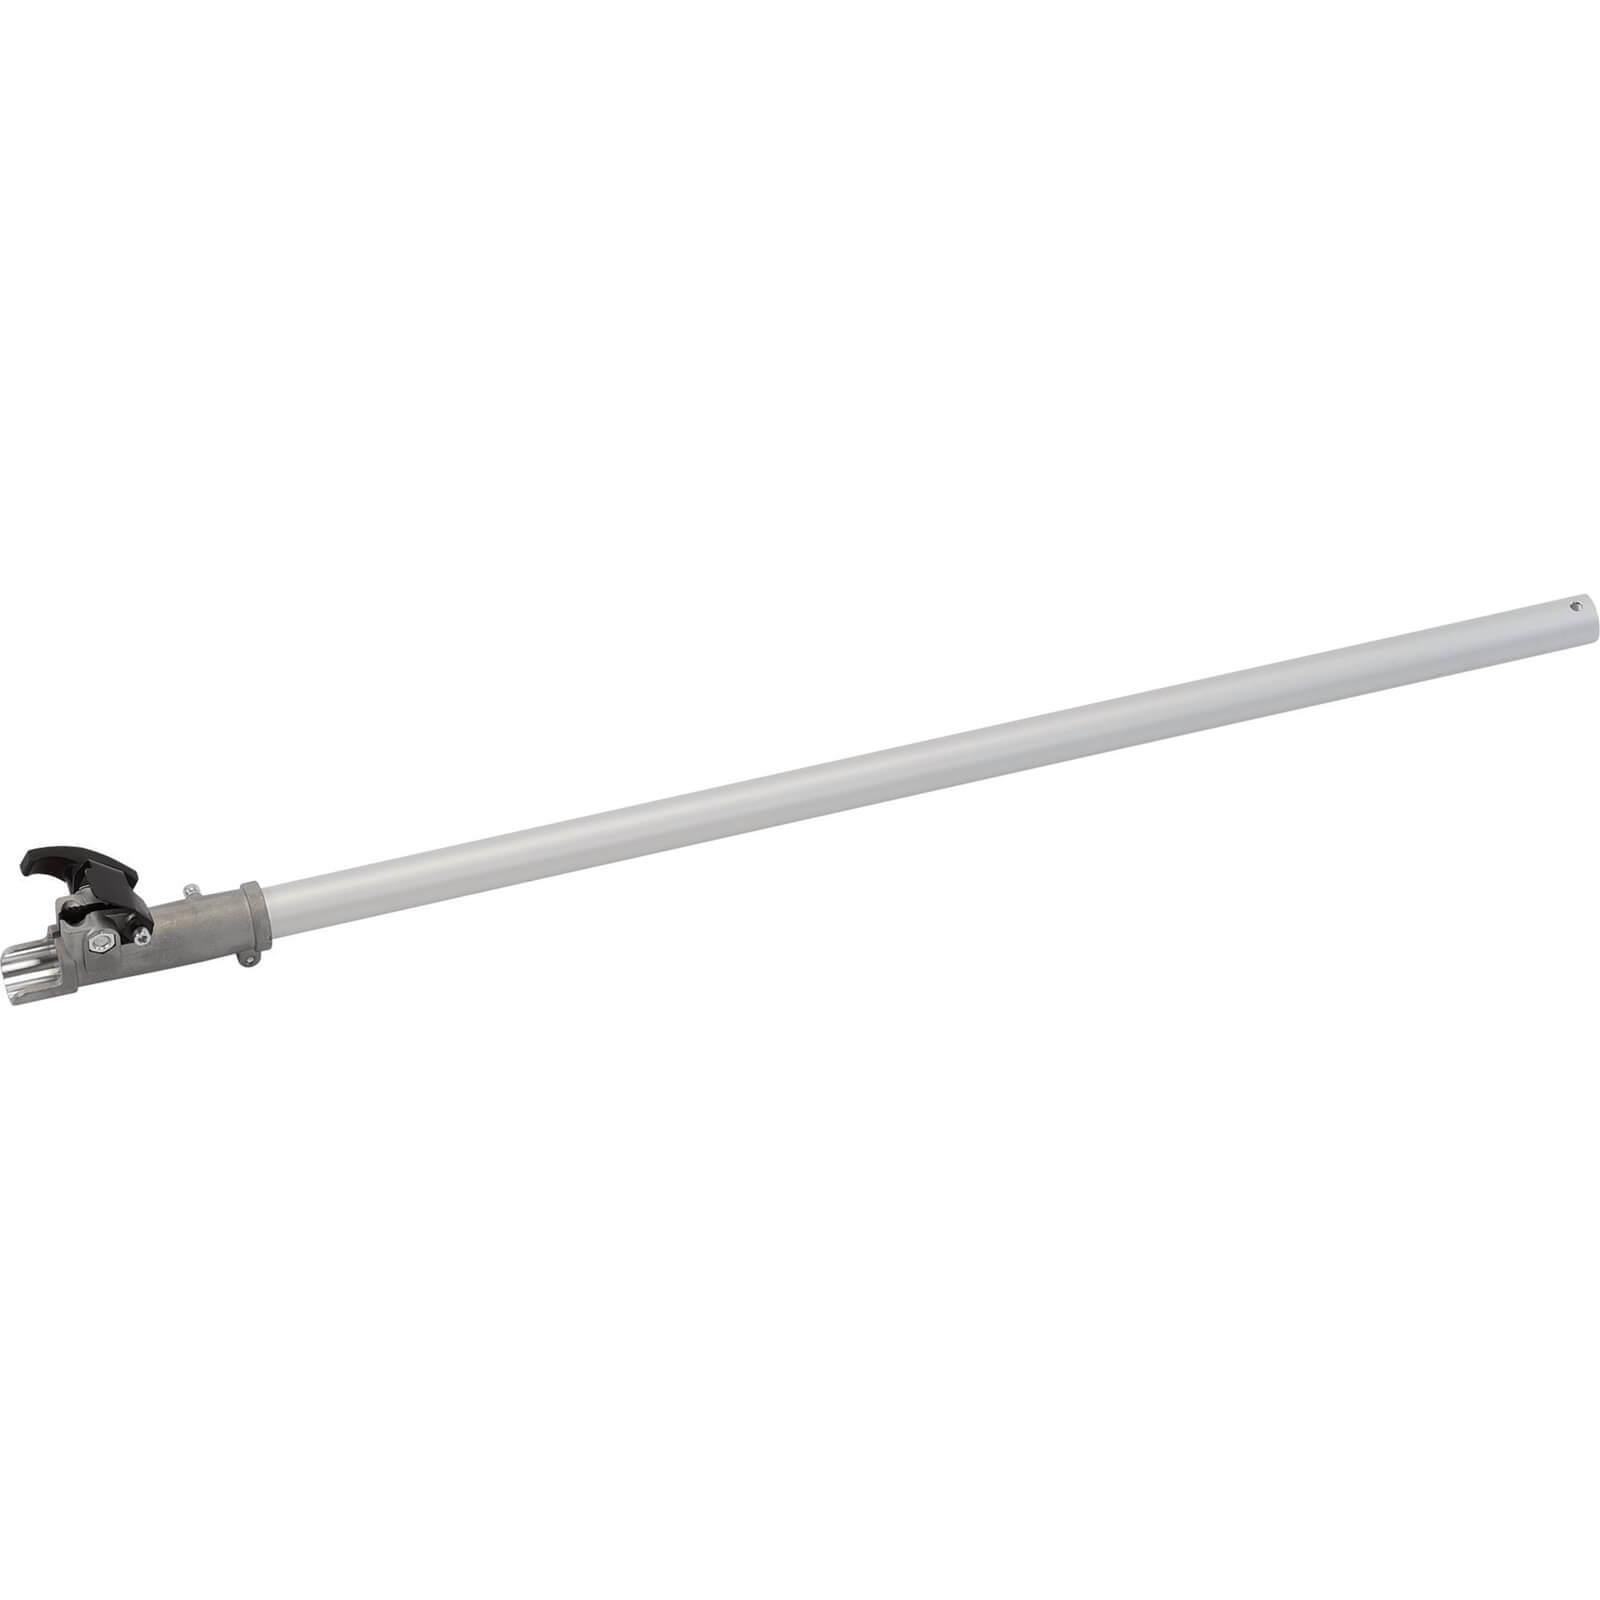 Image of Draper Expert 700mm Extension Pole for 84706 Petrol 4 In 1 Garden Tool